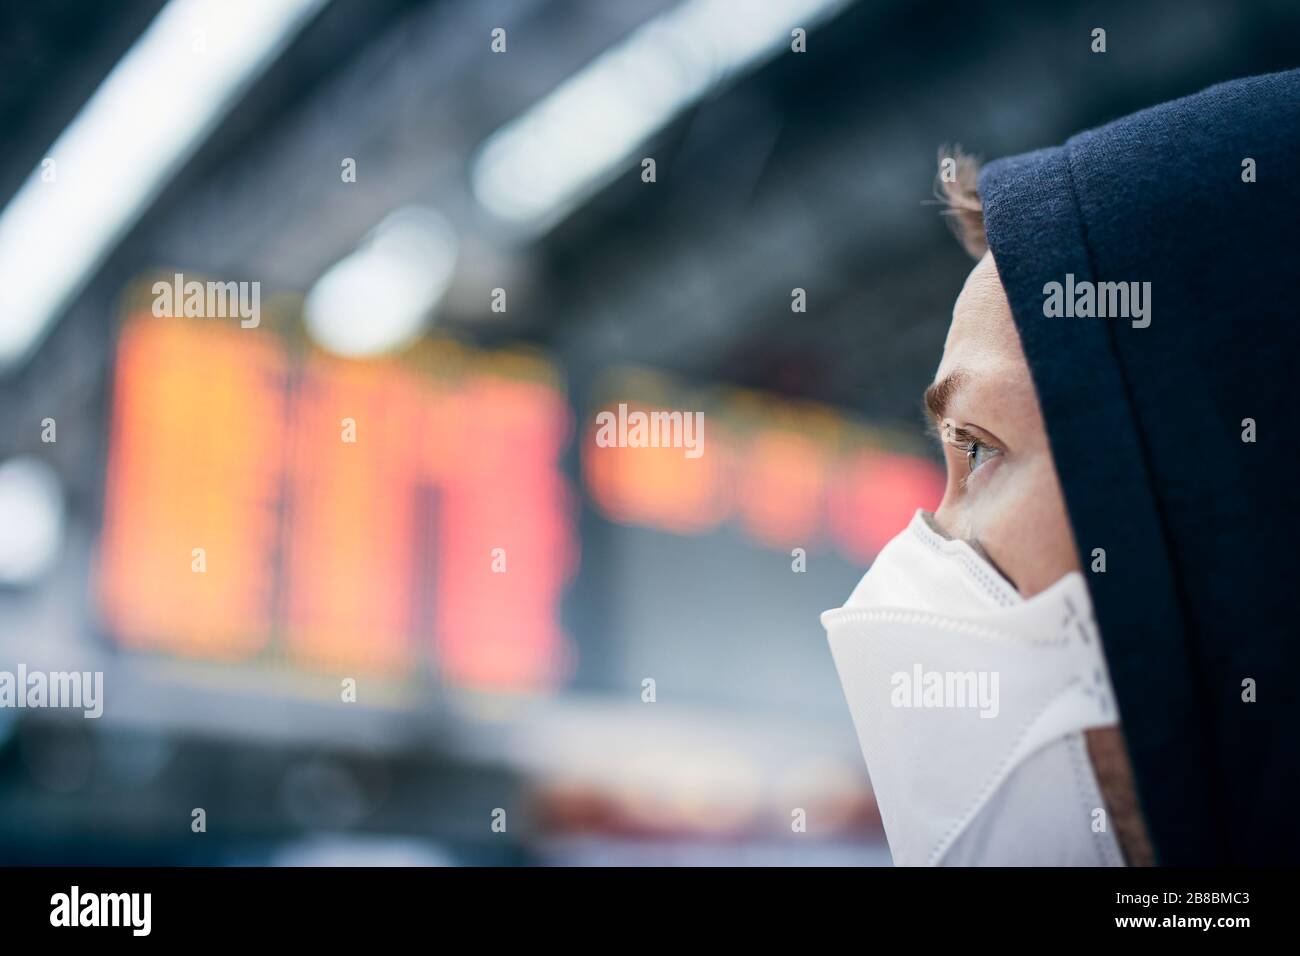 Man wearing face mask against airport departure board. Themes coronavirus, canceled flights and personal protection. Stock Photo